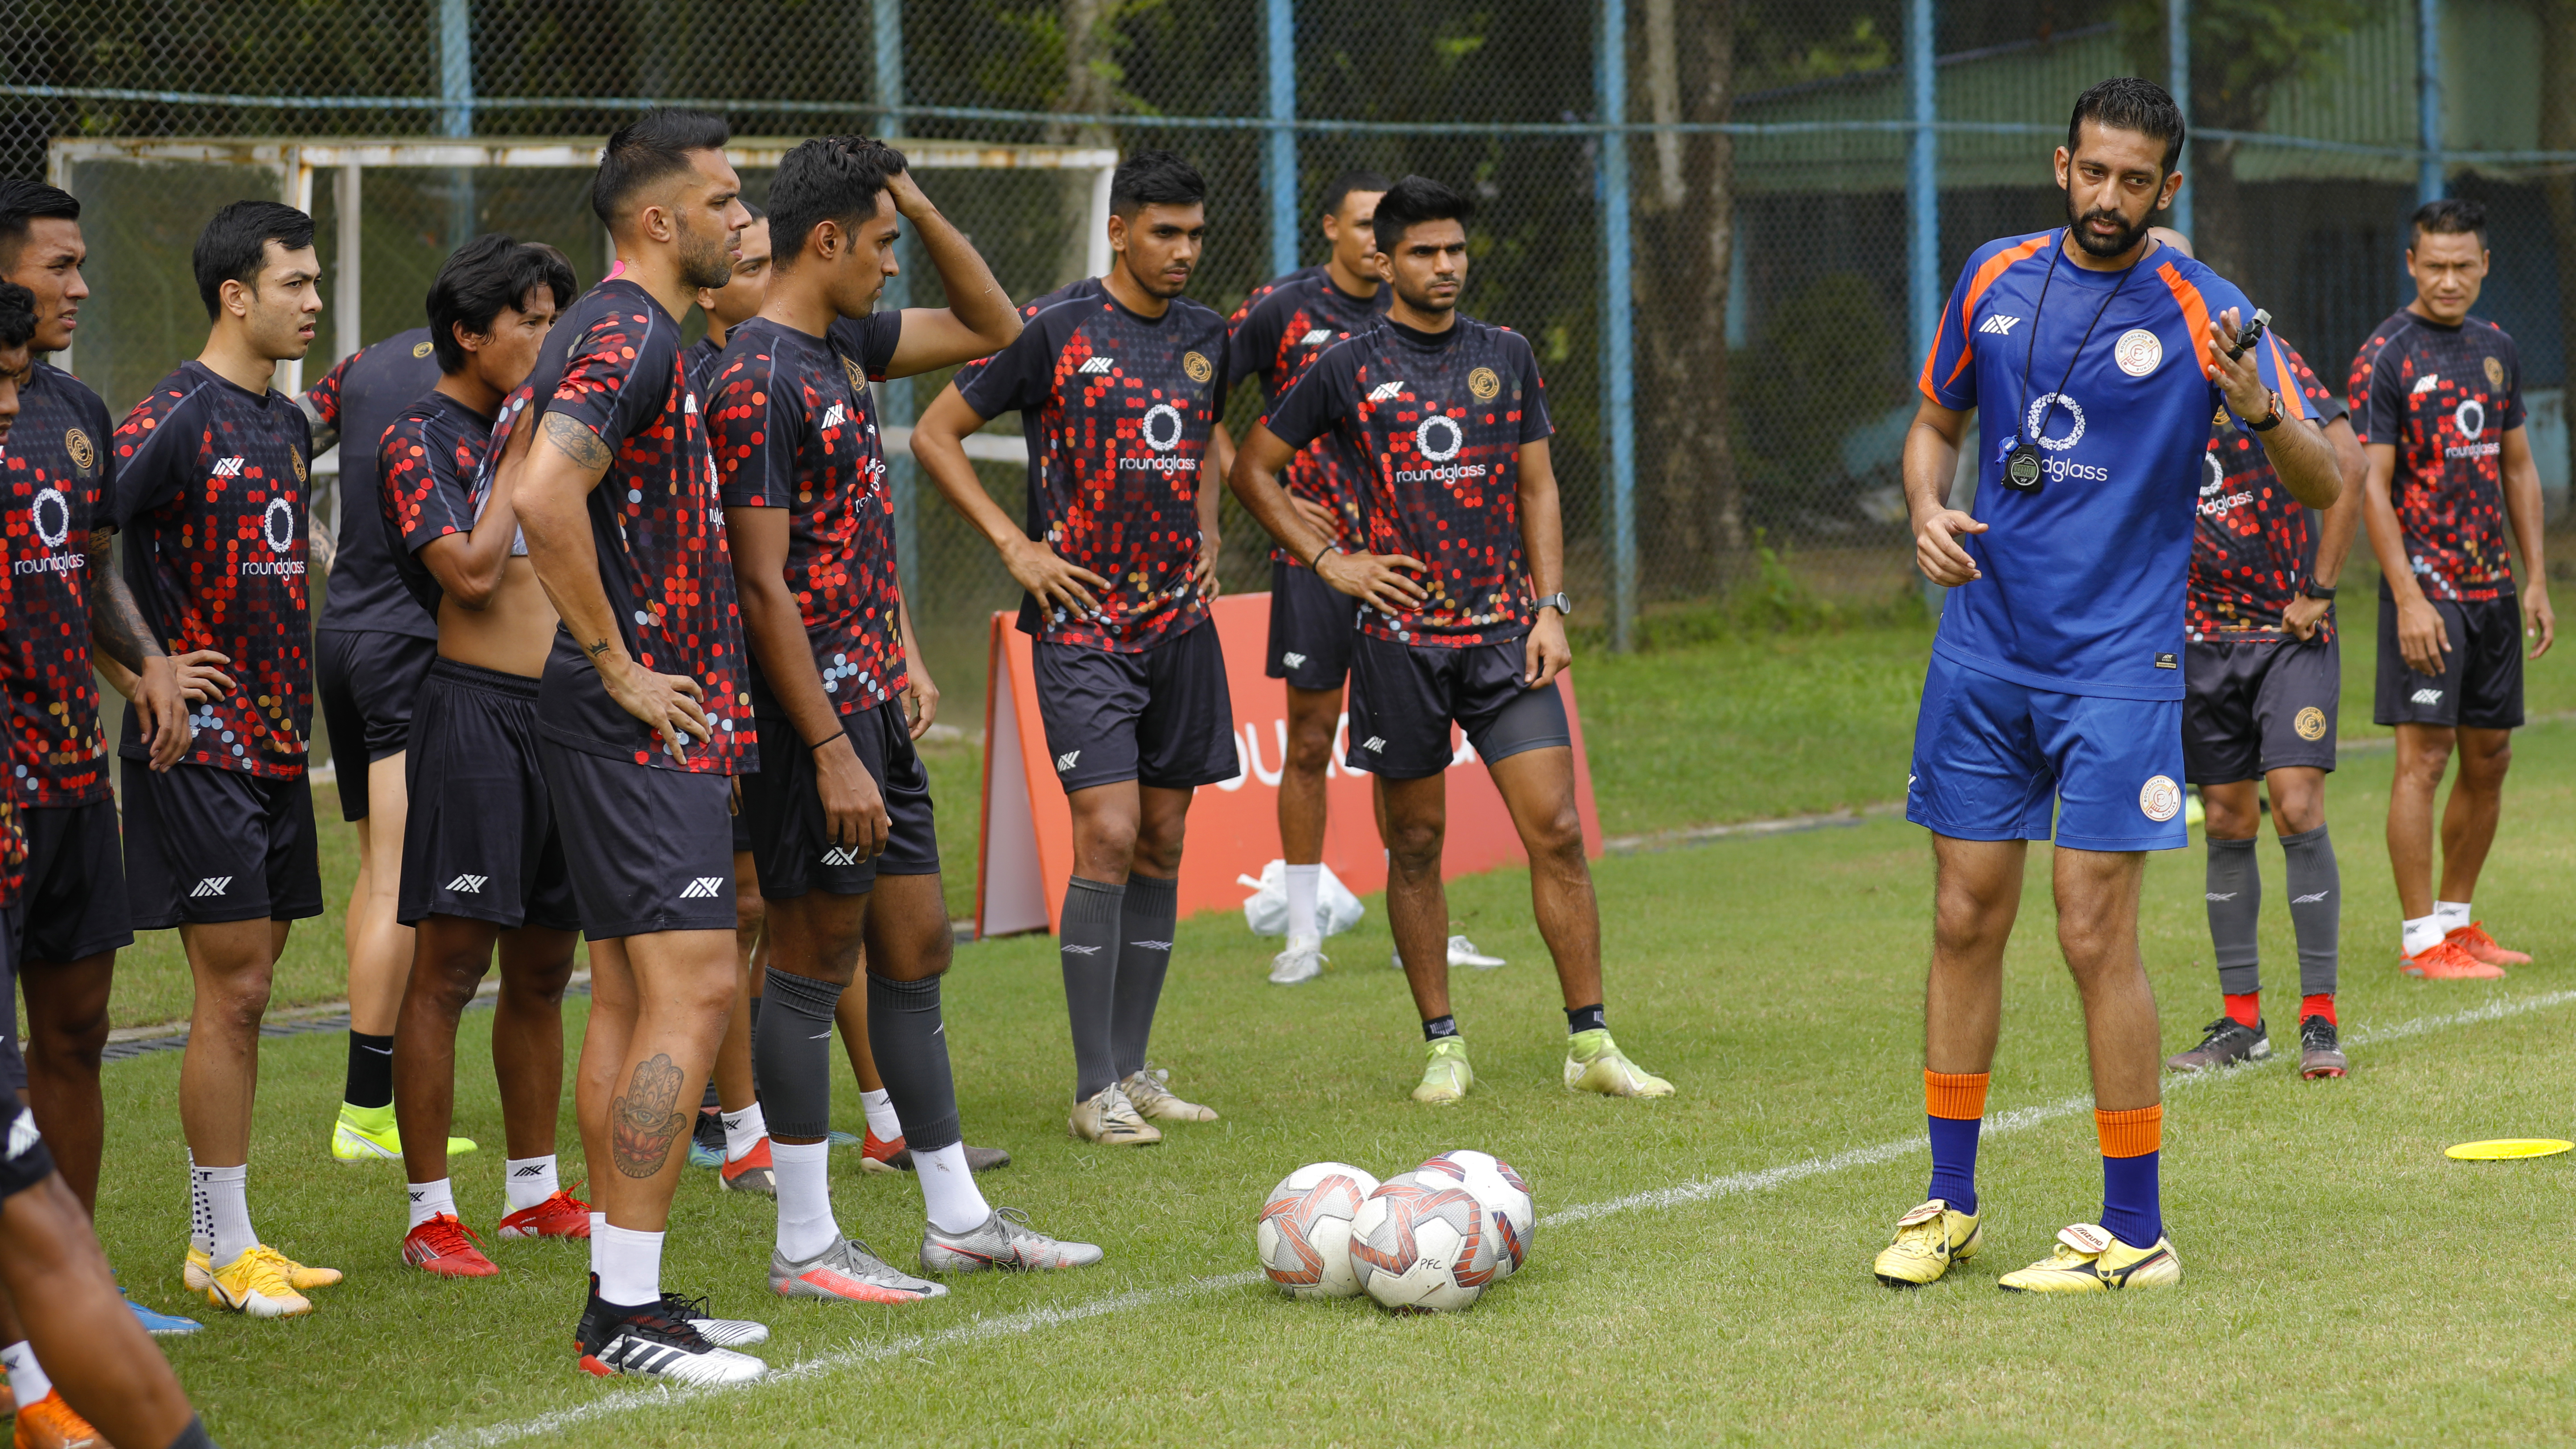 I-League 2022: The team is in good spirits assures Punjab FC's assistant coach Floyd Pinto ahead of their match against Kenkre FC